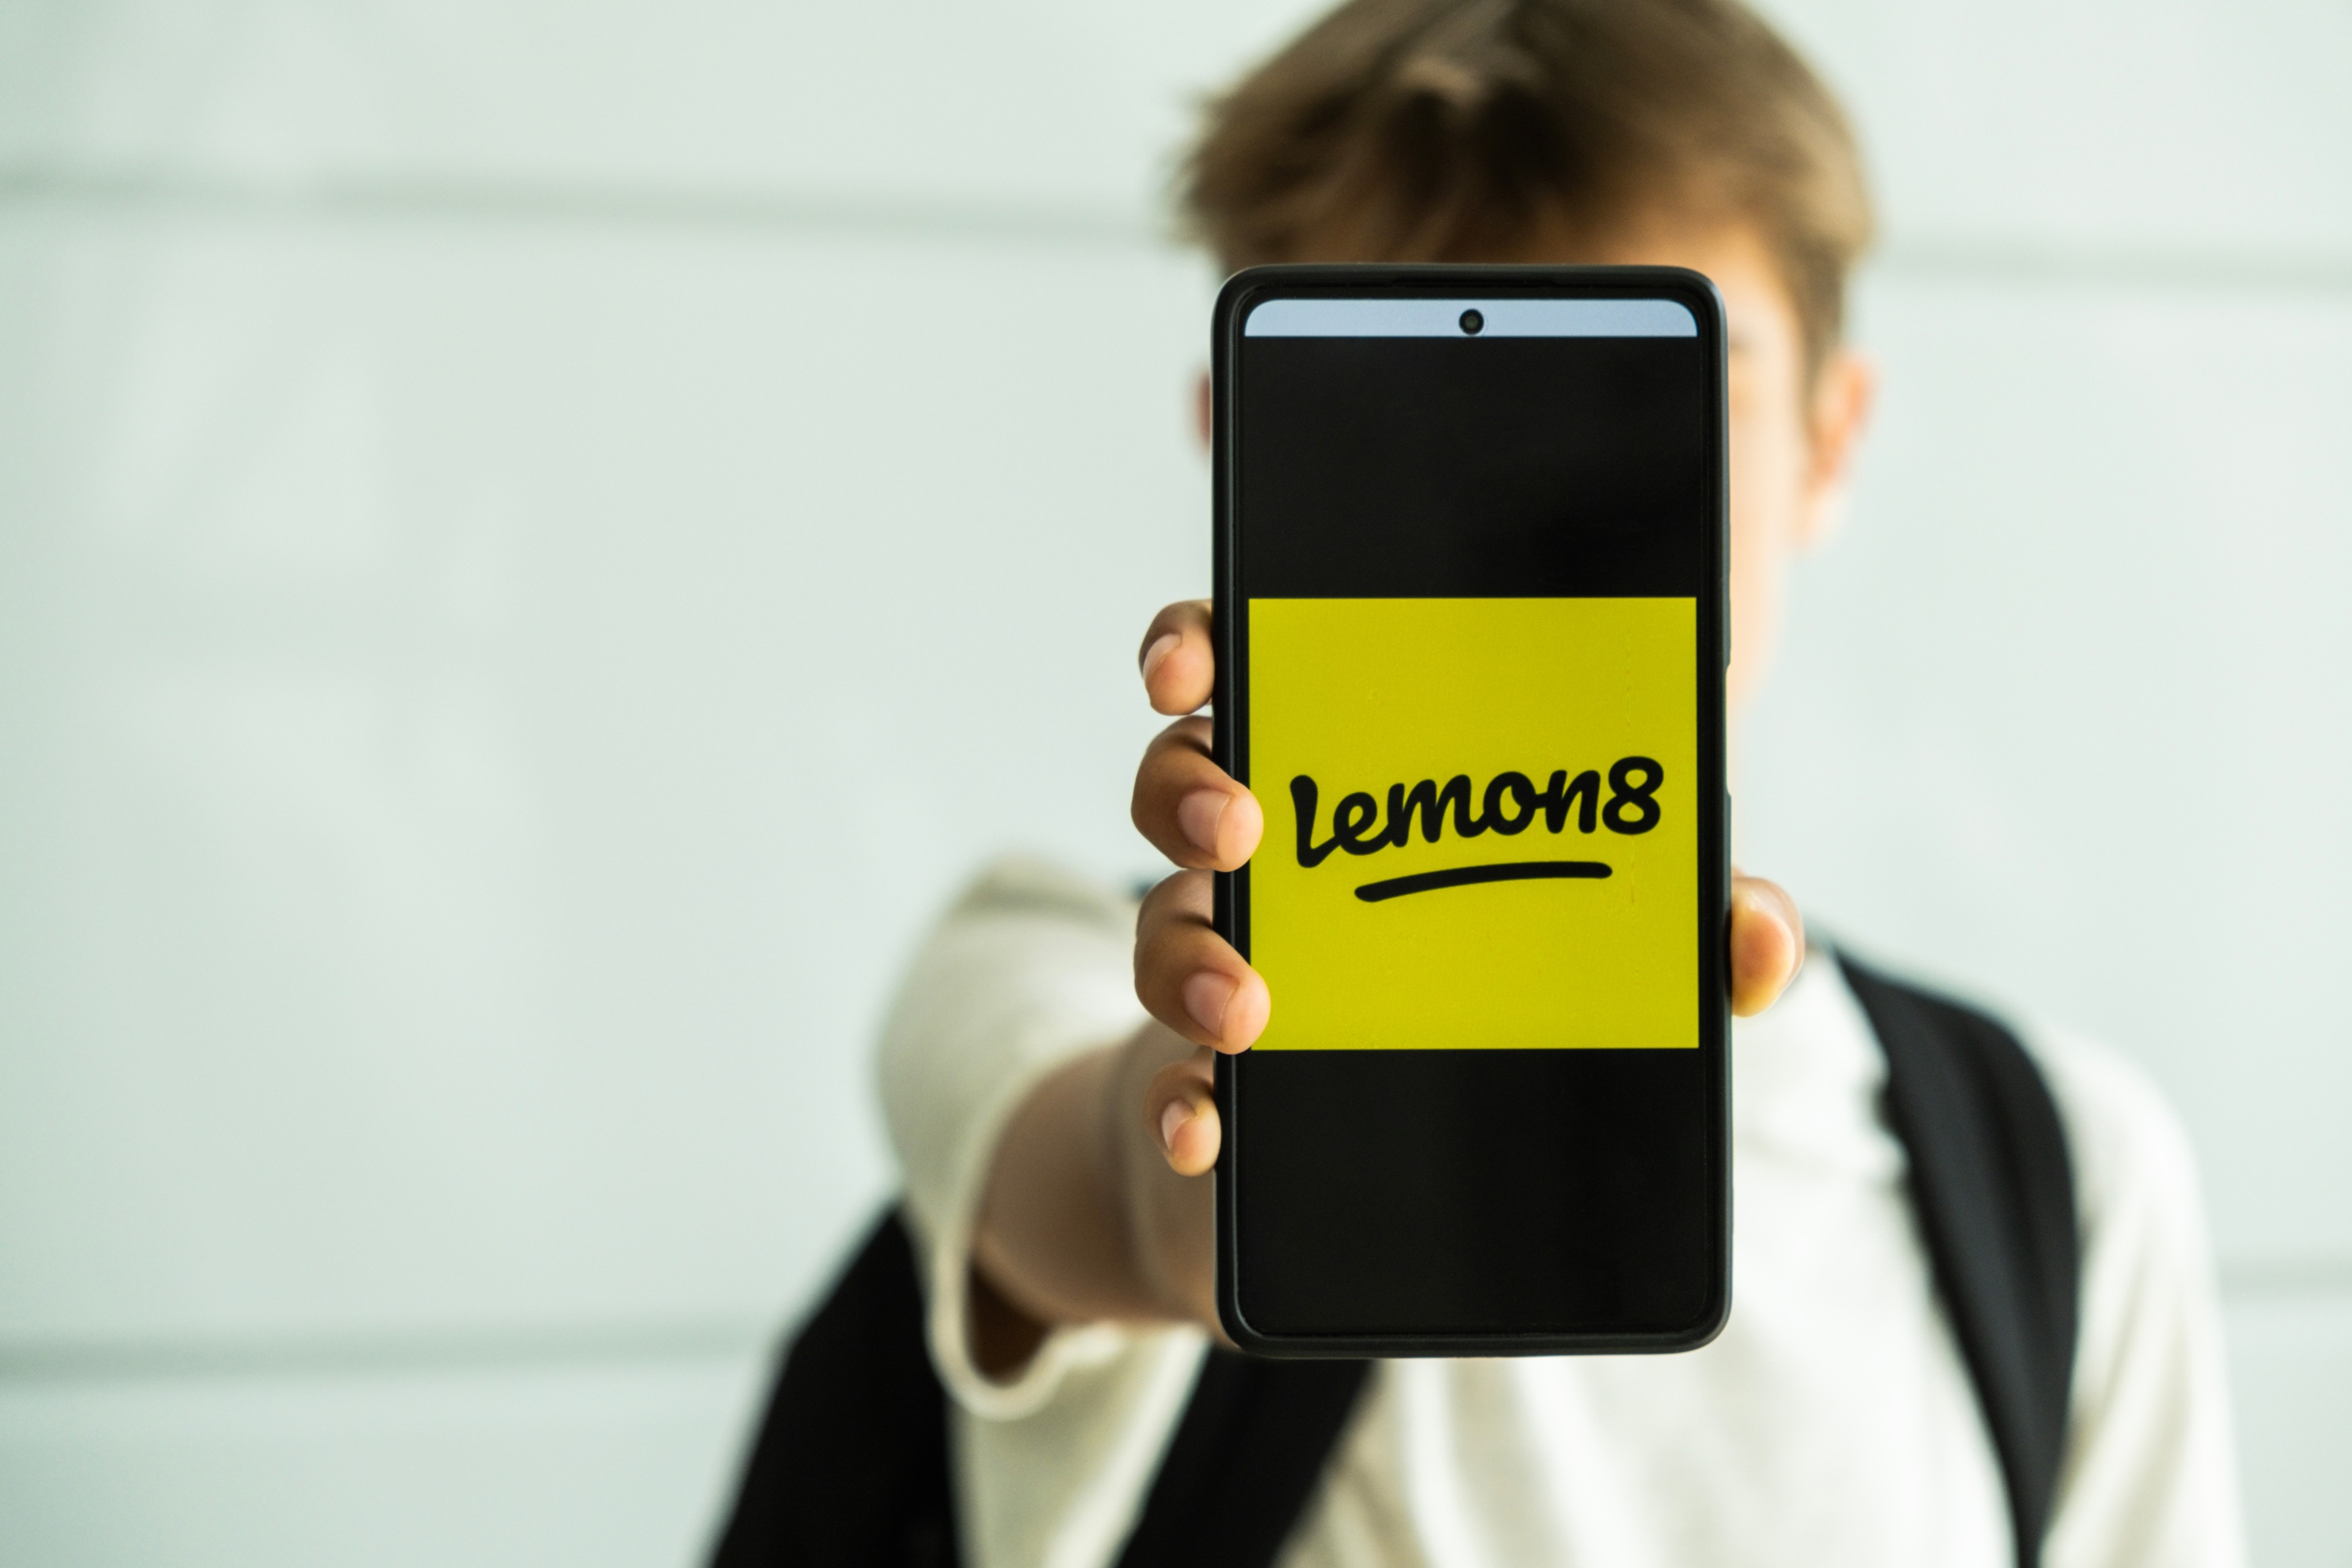 Lifestyle app Lemon8 has seen its popularity grow on both Apple’s App Store and Google Play in the United States. Photo: Shutterstock